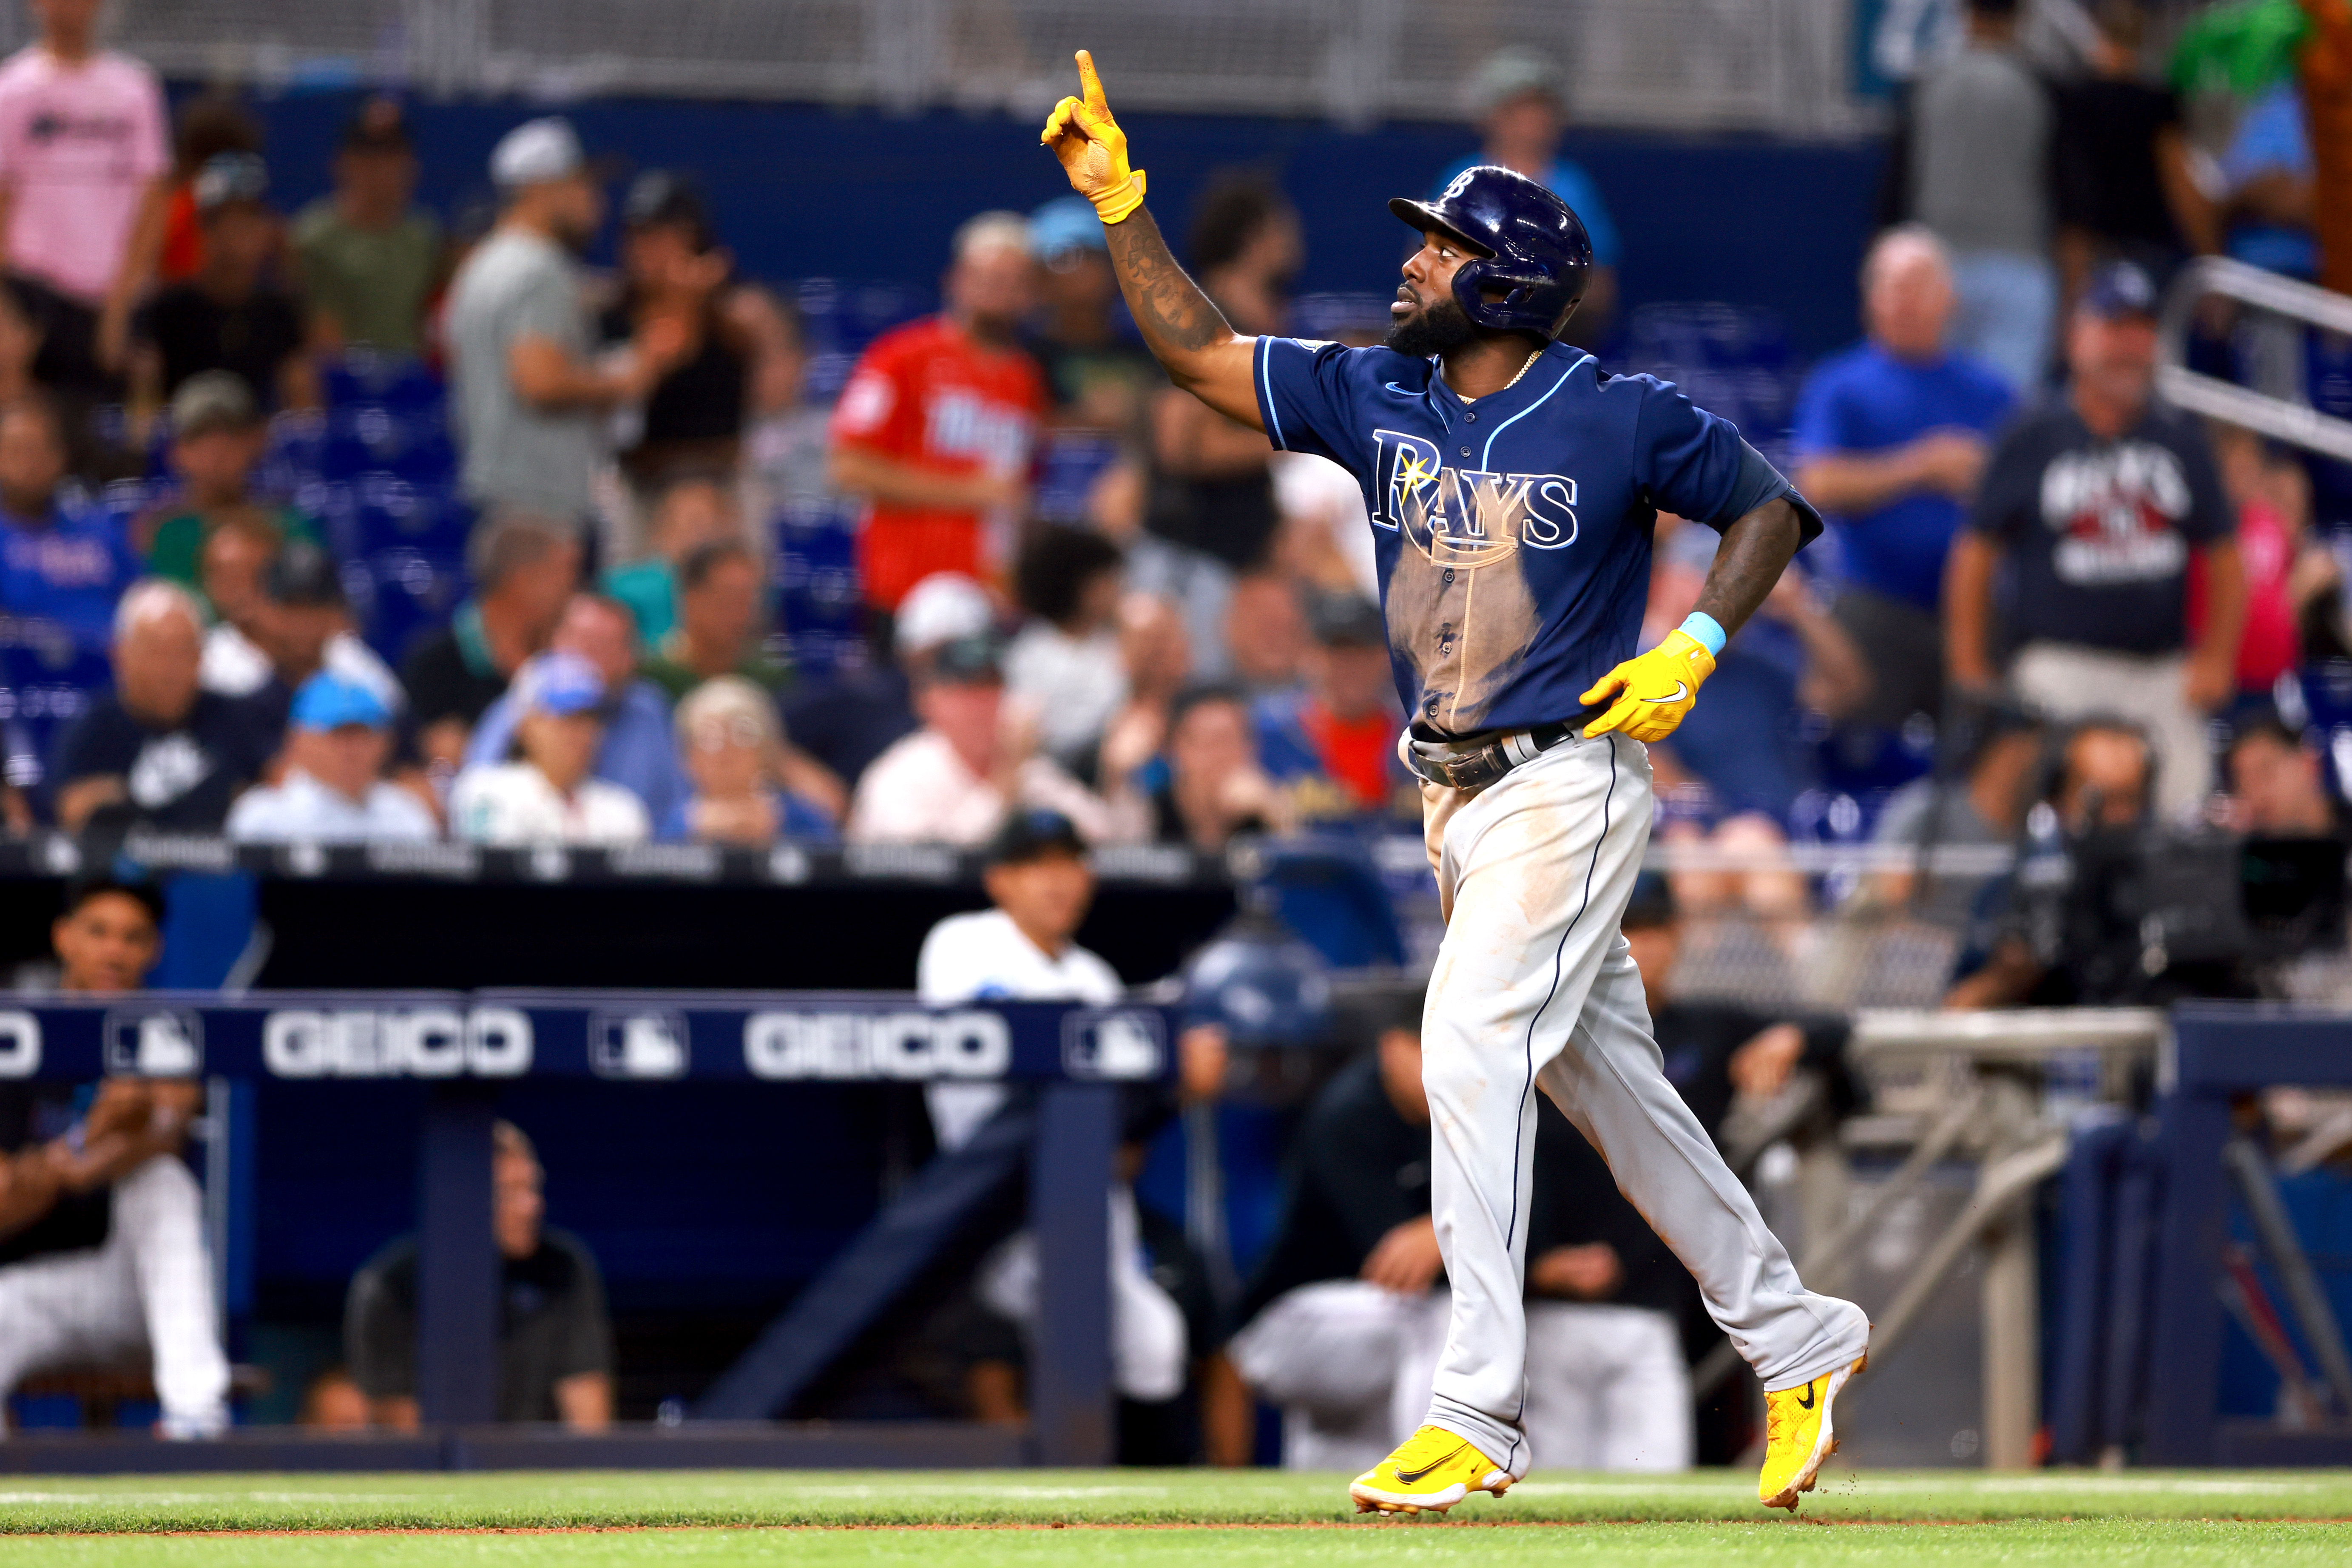 Jazz Chisholm Jr. #2 of the Miami Marlins bats in the game against News  Photo - Getty Images